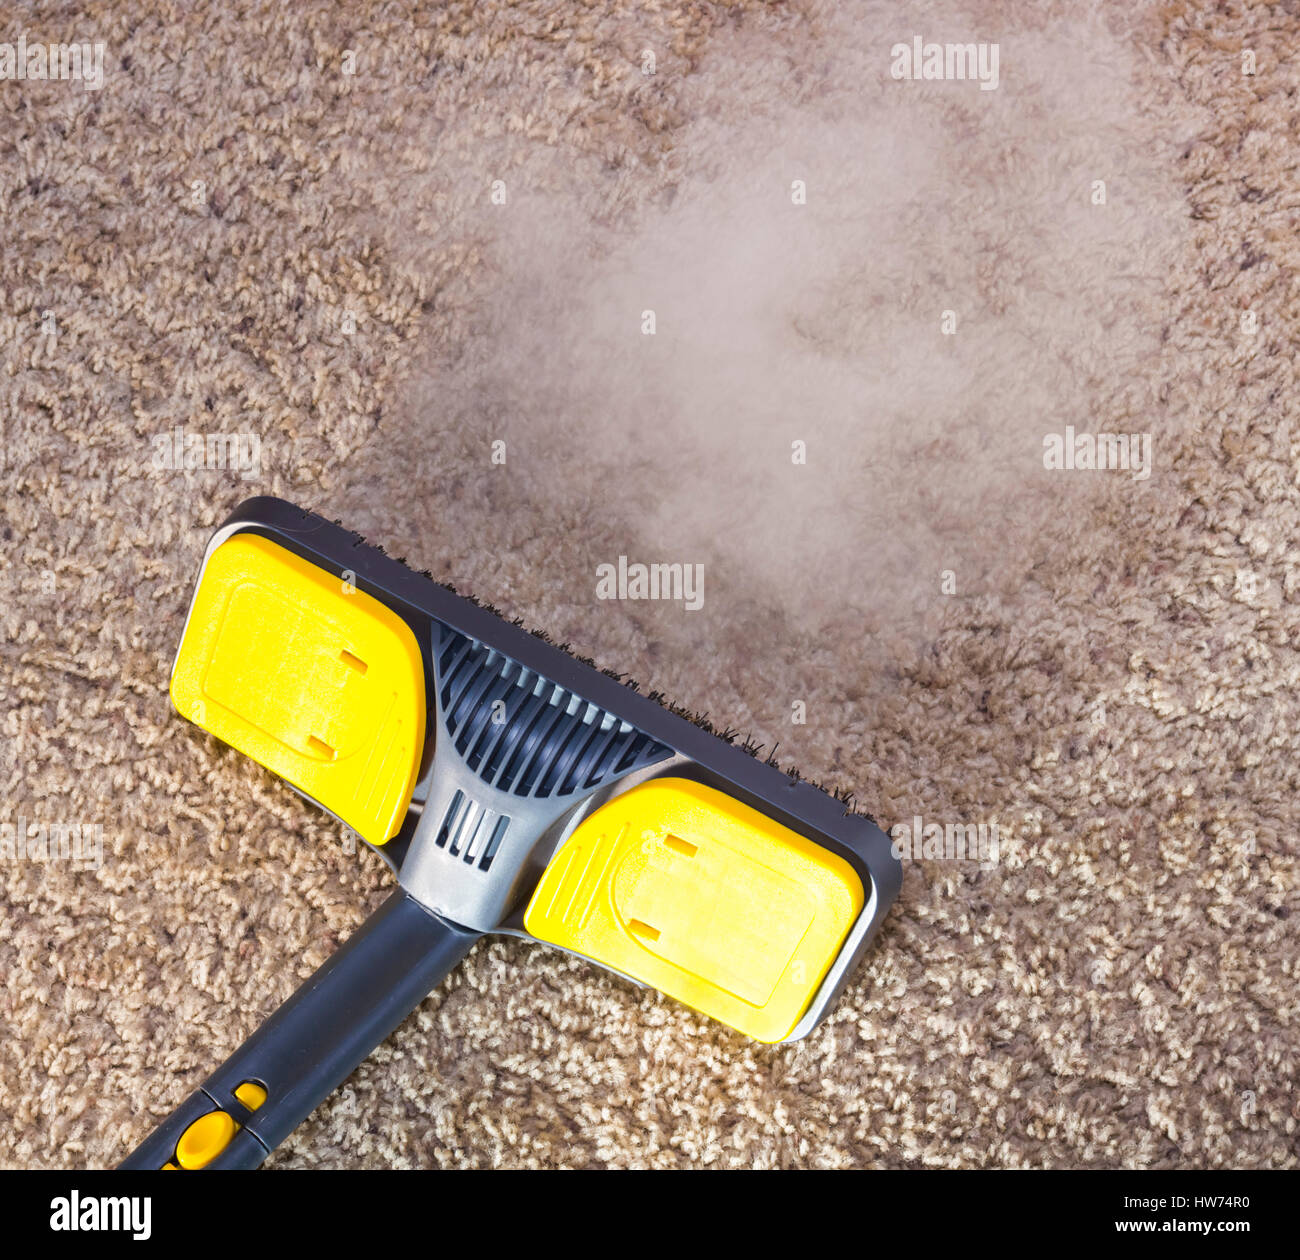 Using dry steam cleaner to sanitize floor carpet. Stock Photo